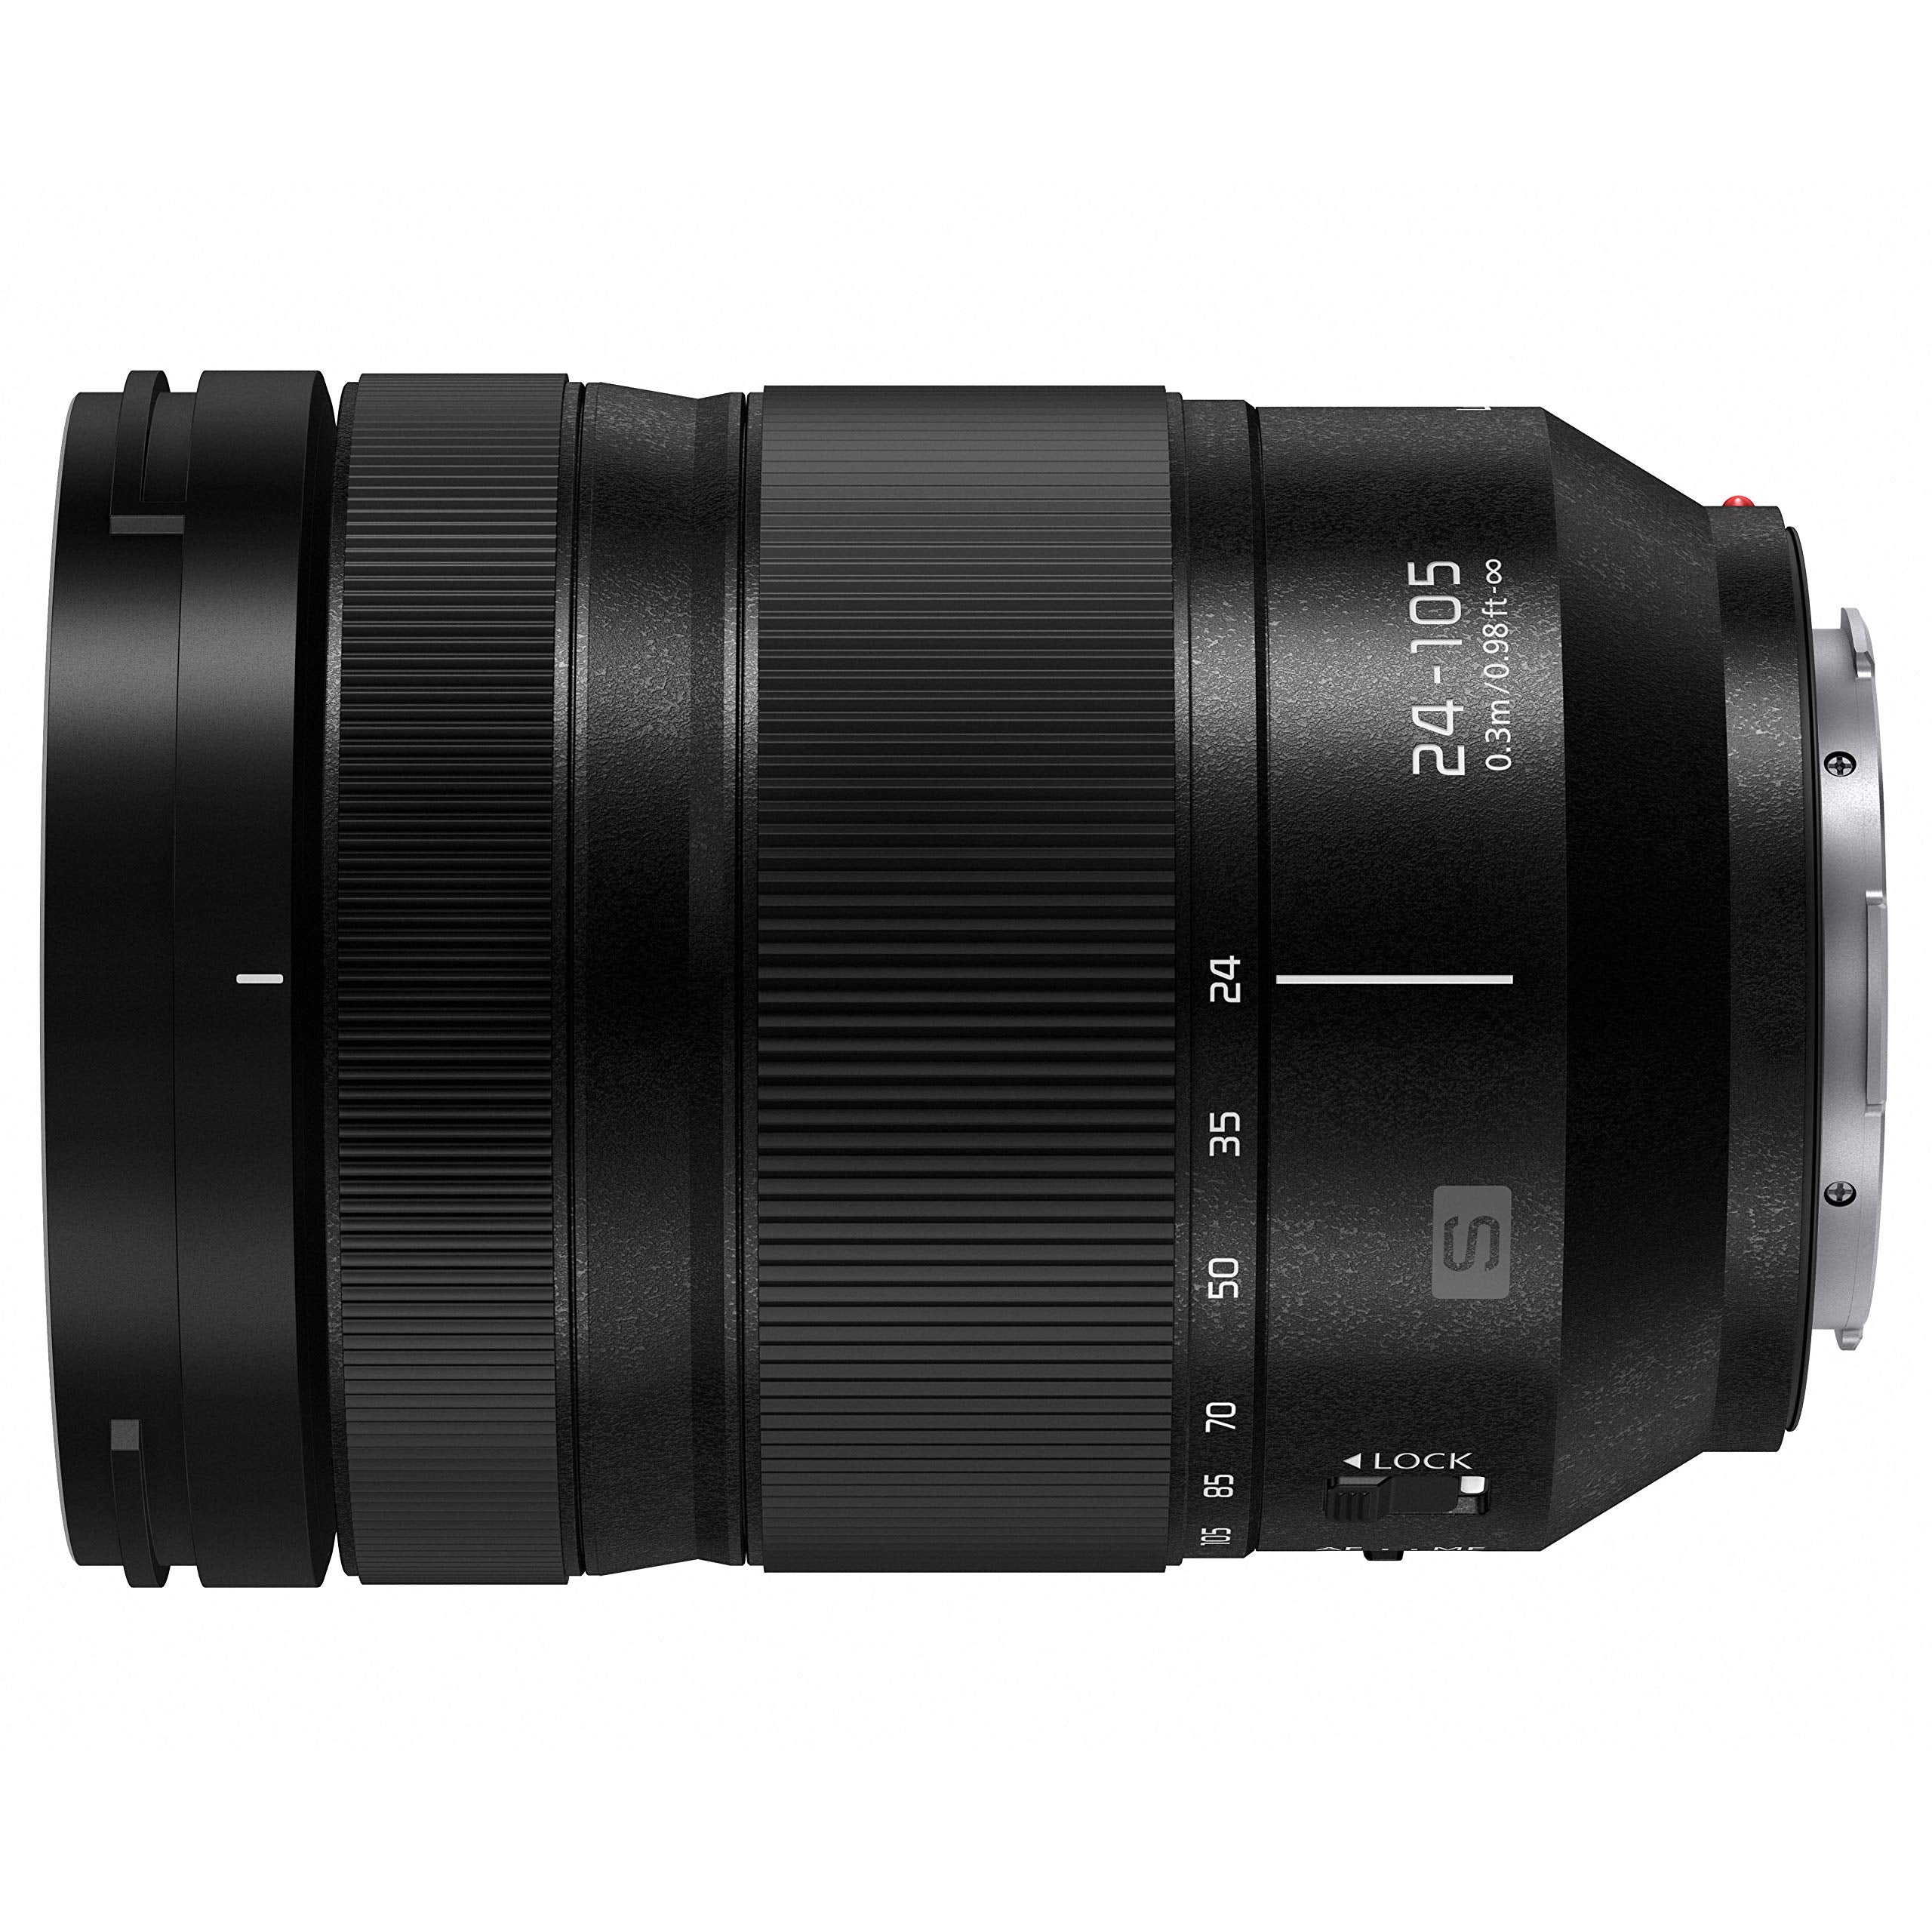 Panasonic LUMIX S 24-105mm F4 Lens, Full-Frame L Mount, Optical Image Stabilizer and Rugged Dust/Splash/Freeze-Resistant for Panasonic LUMIX S Series Mirrorless Cameras - S-R24105